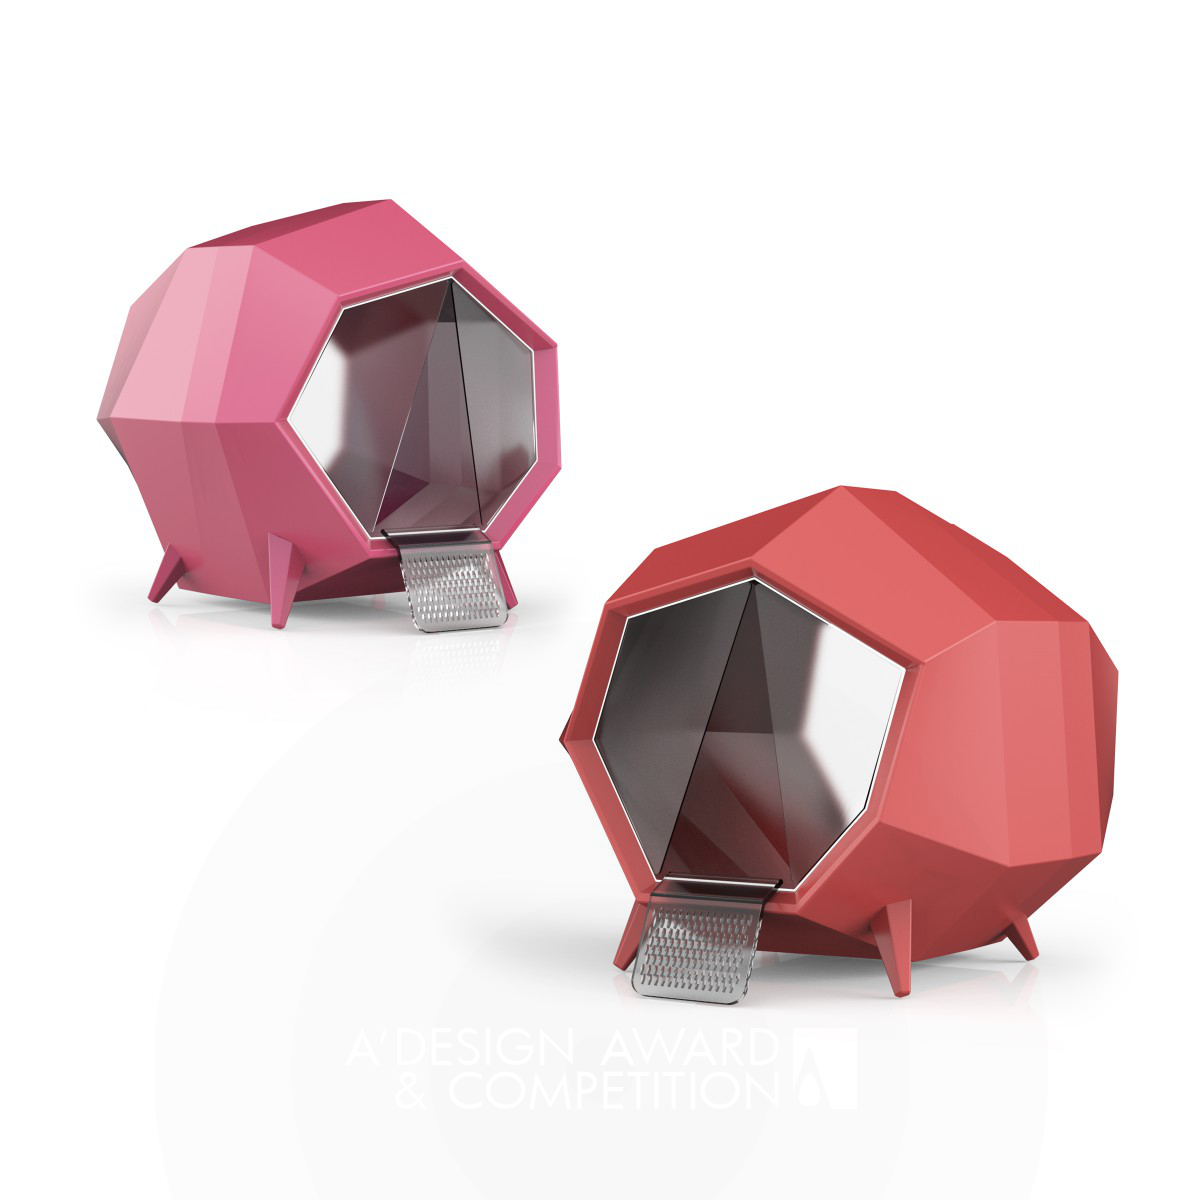 Polygon Pet Nest of Intelligence Product by Tanyu